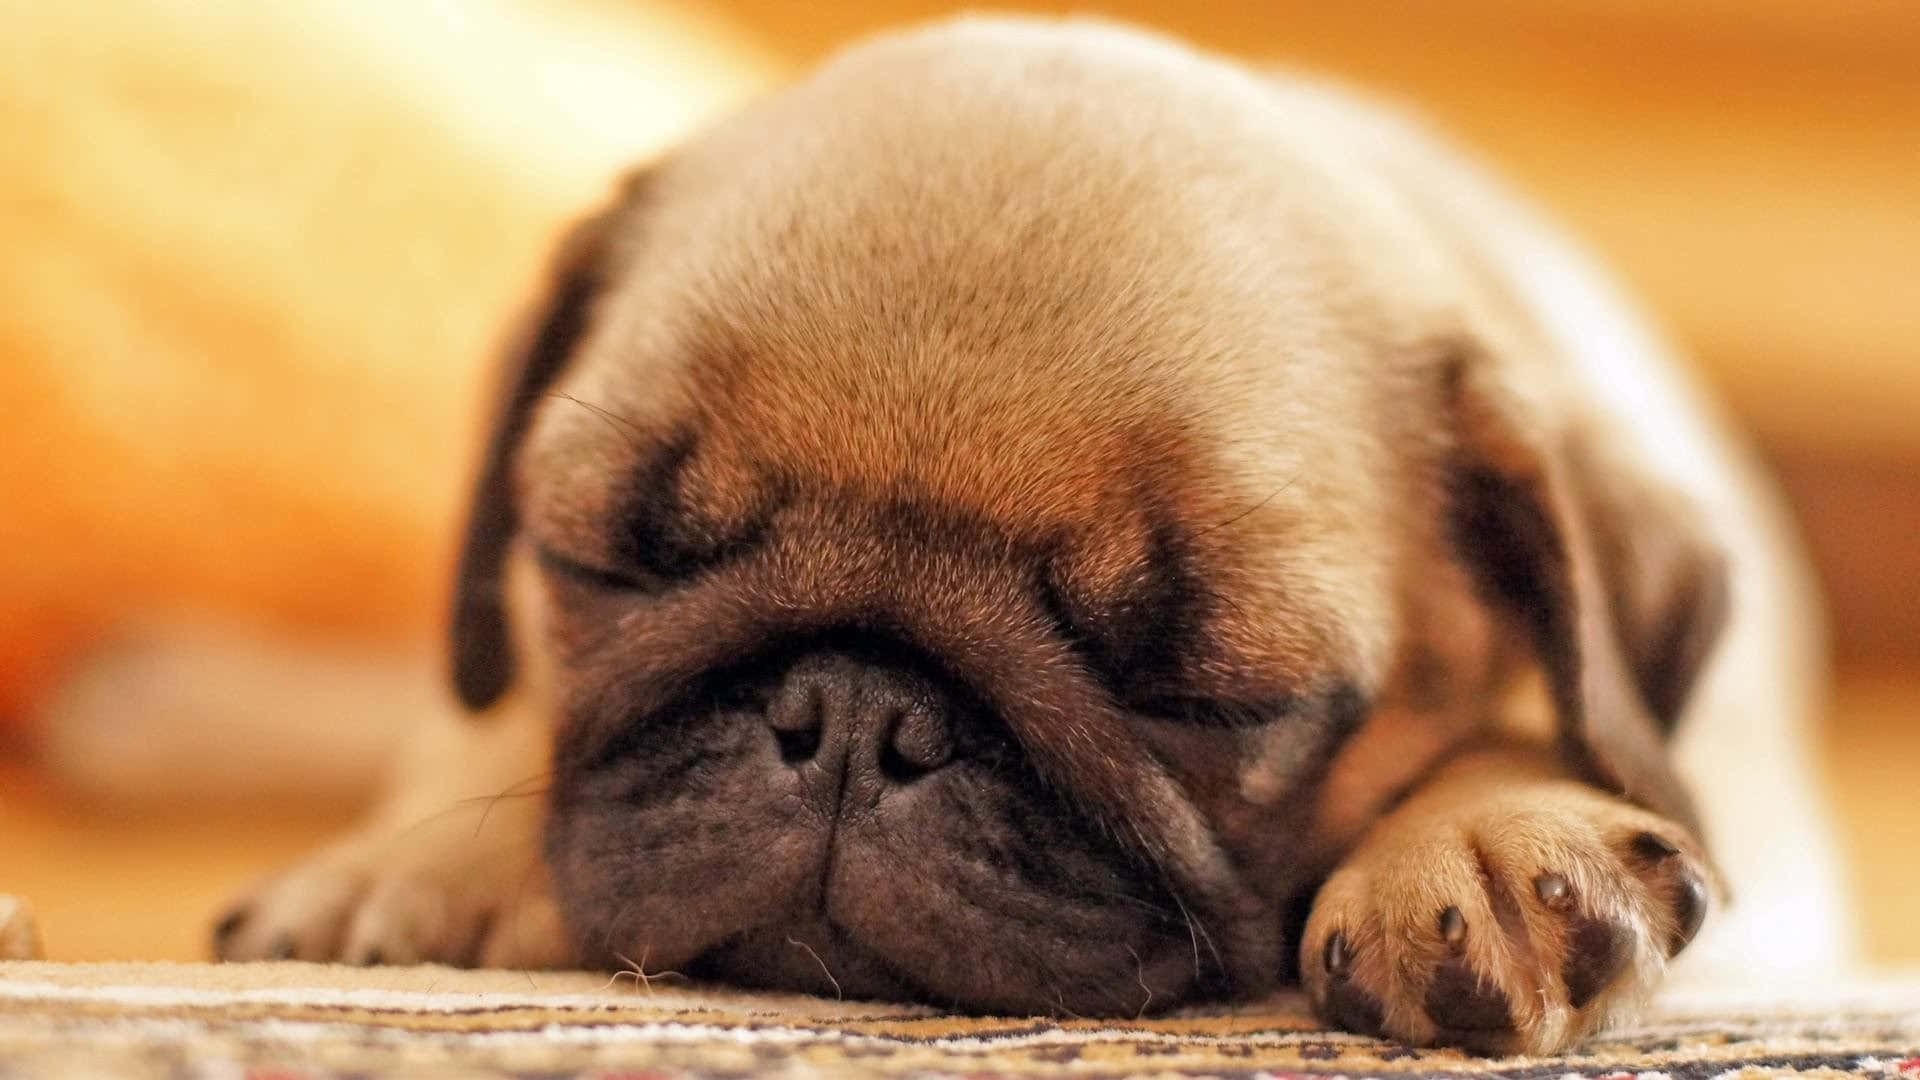 Cute Pug Pictures Wallpaper